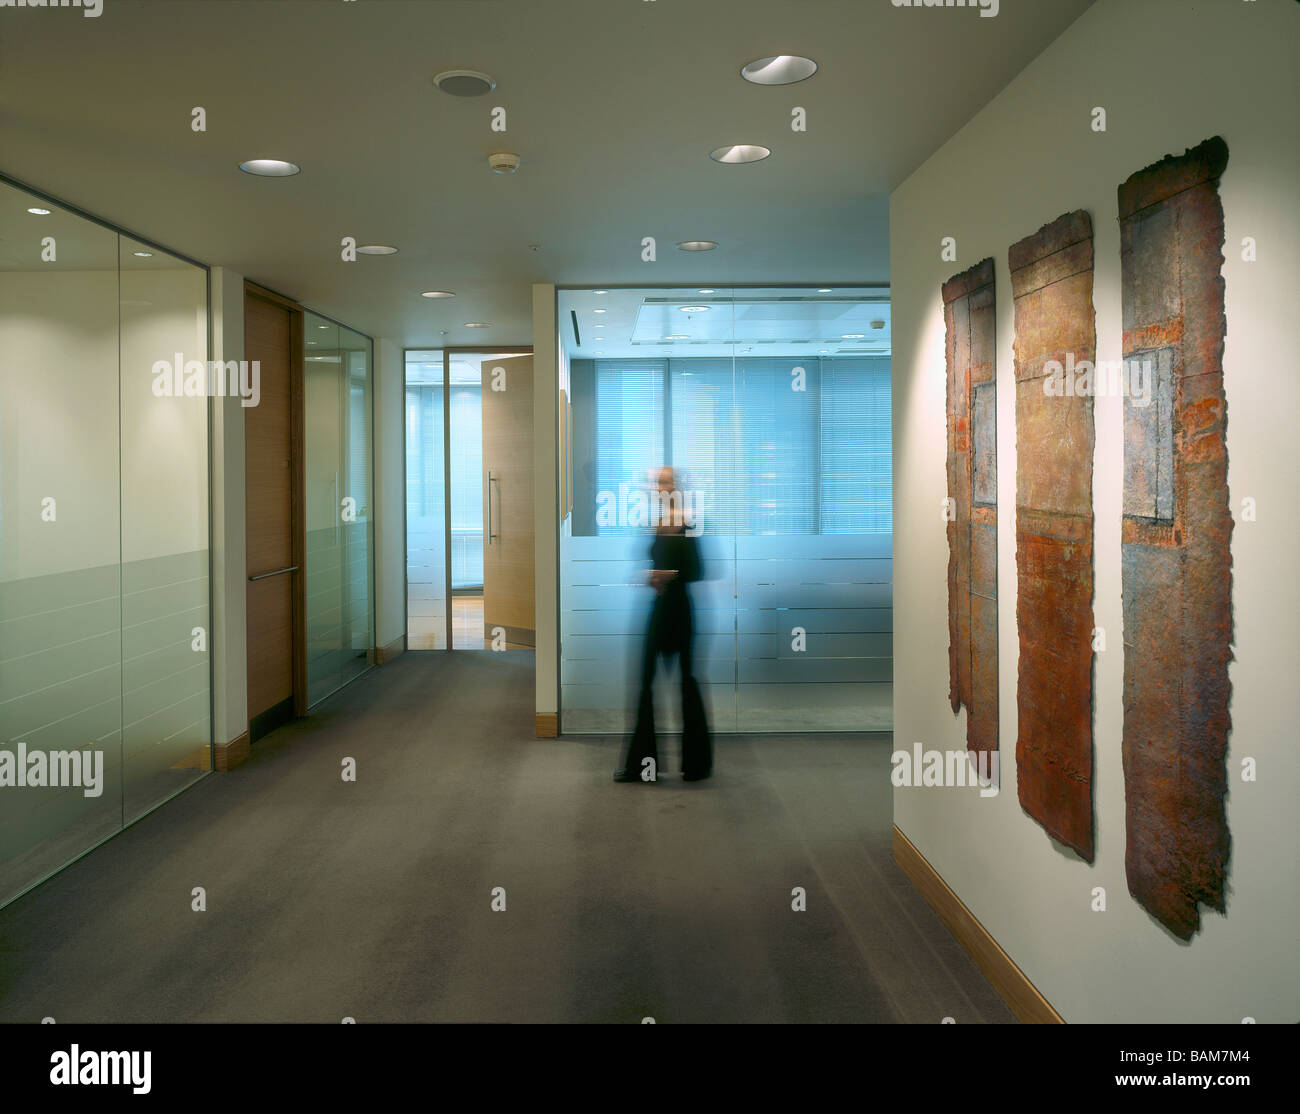 Northern Trust Offices, London, United Kingdom, T P Bennett, Northern trust offices view of corridor artwork and offices. Stock Photo